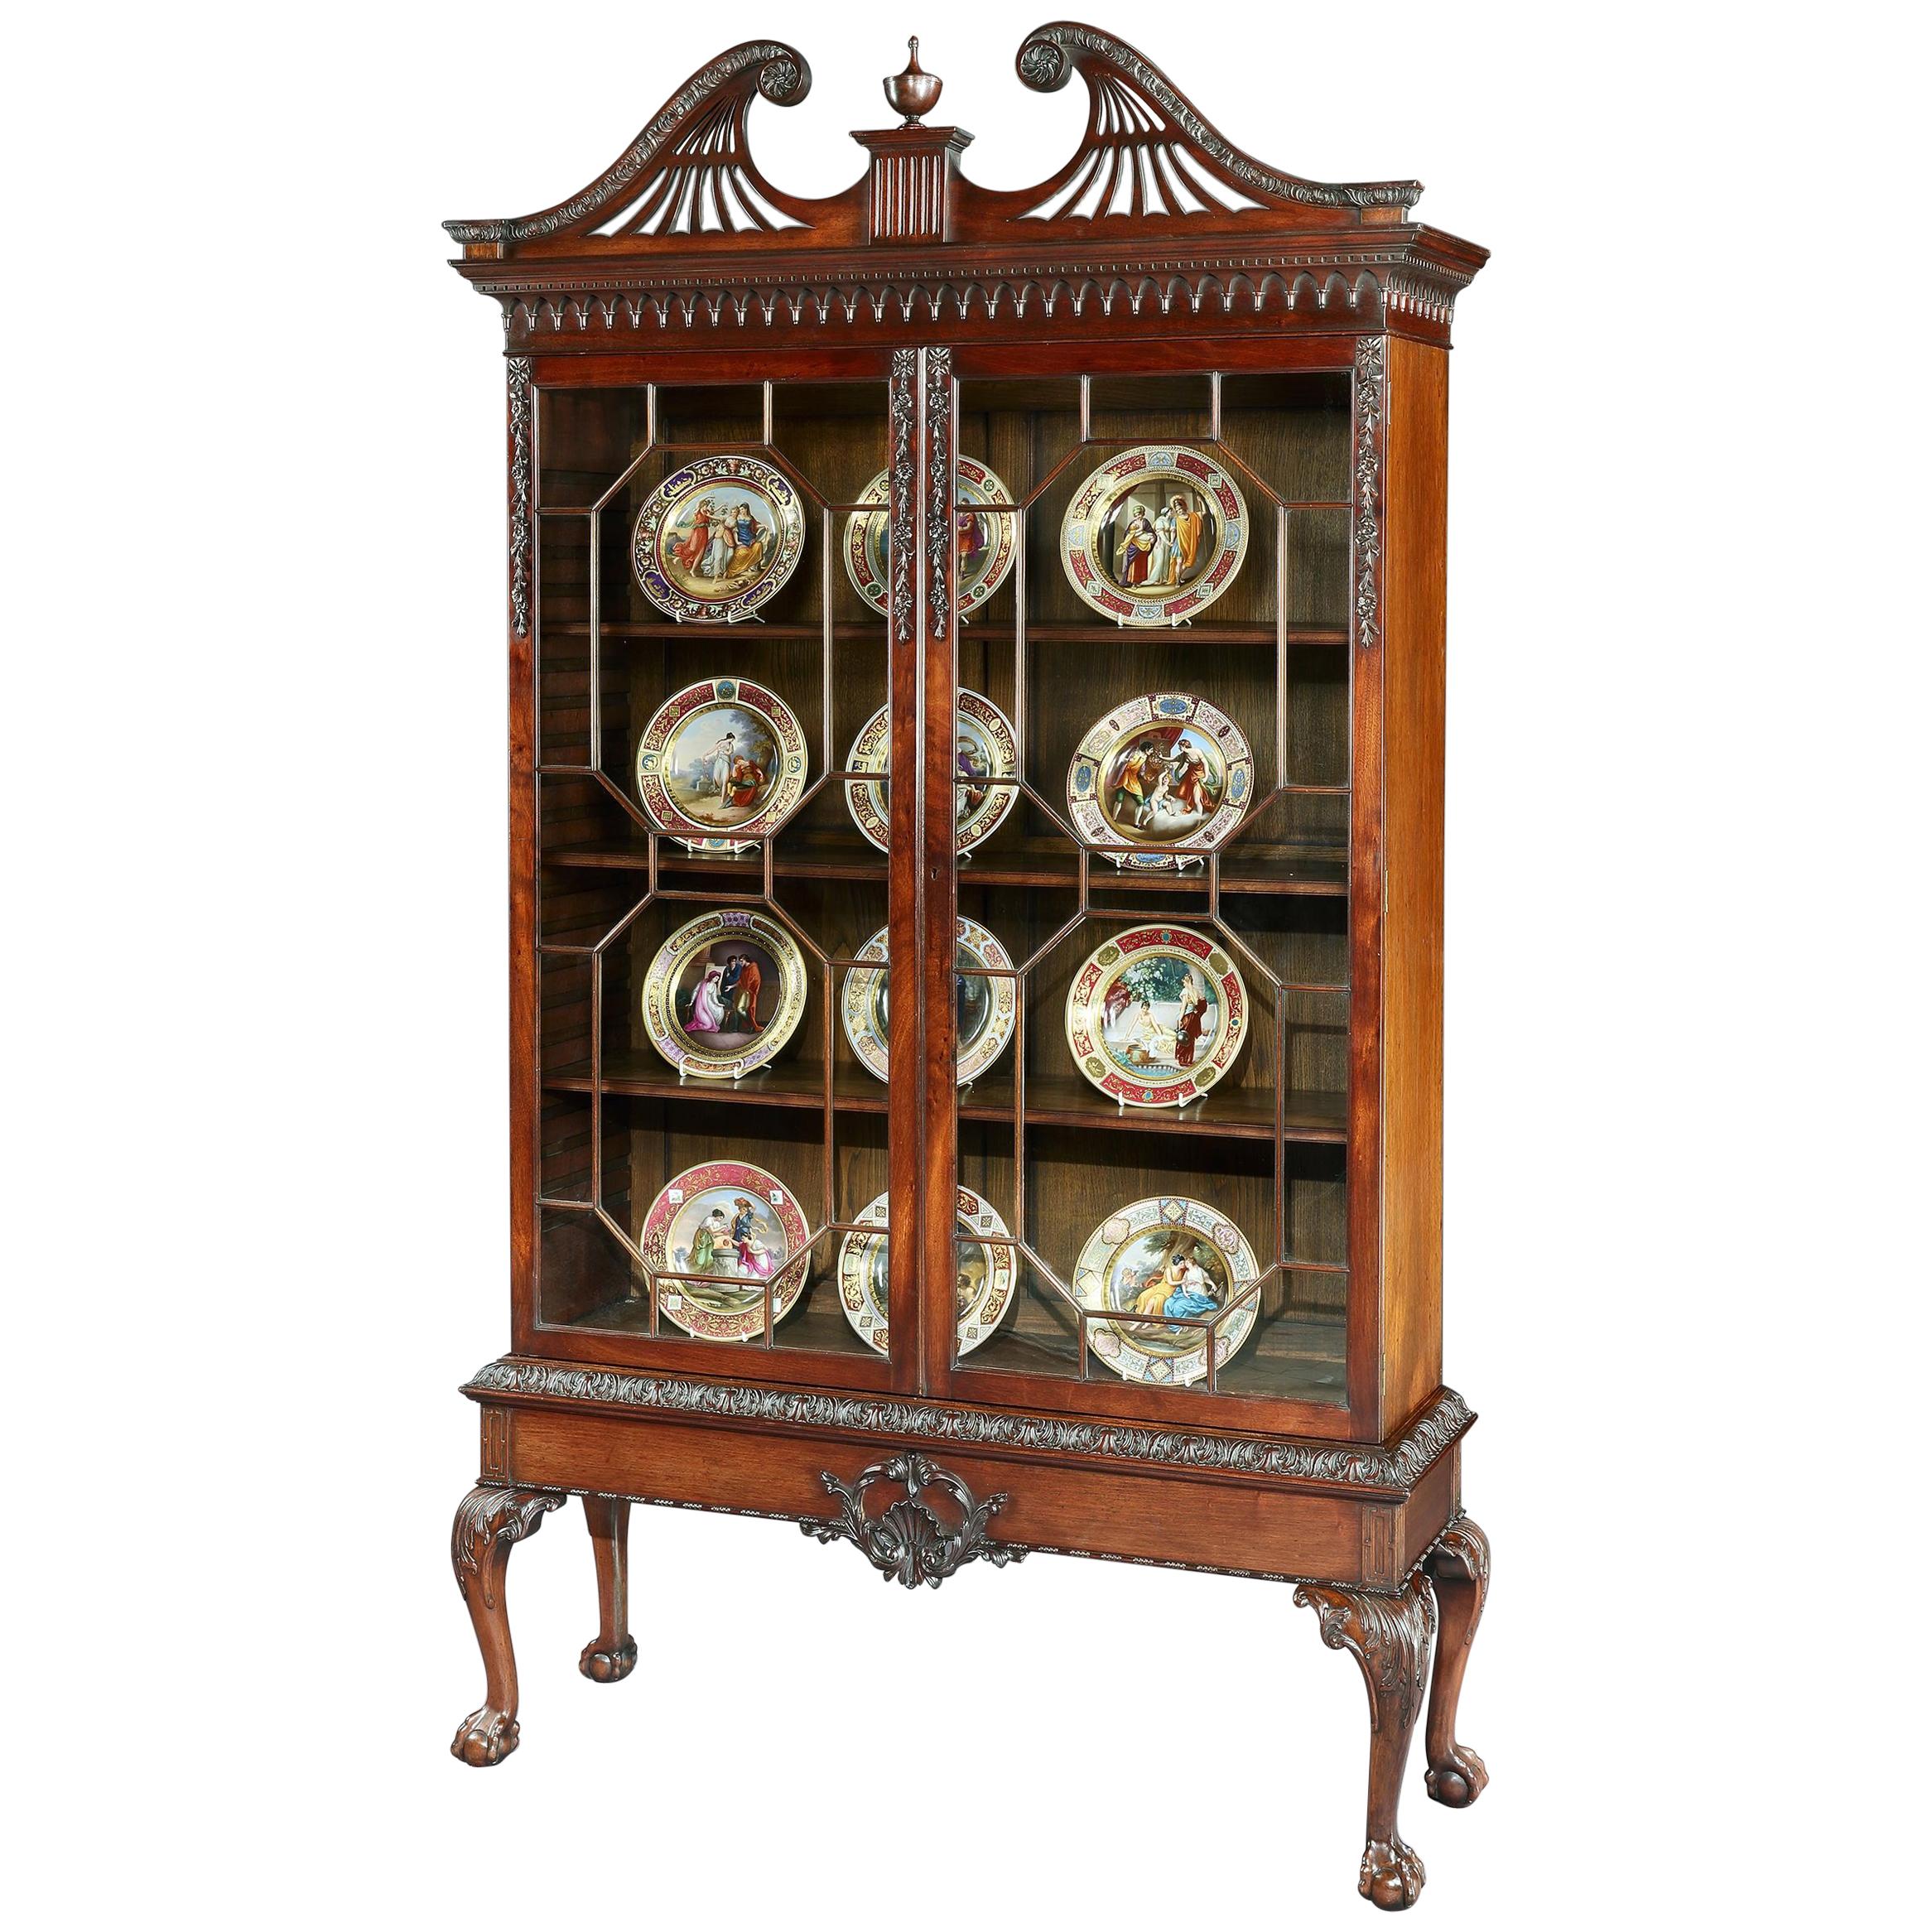 19th Century Display Cabinet in the Manner of Thomas Chippendale